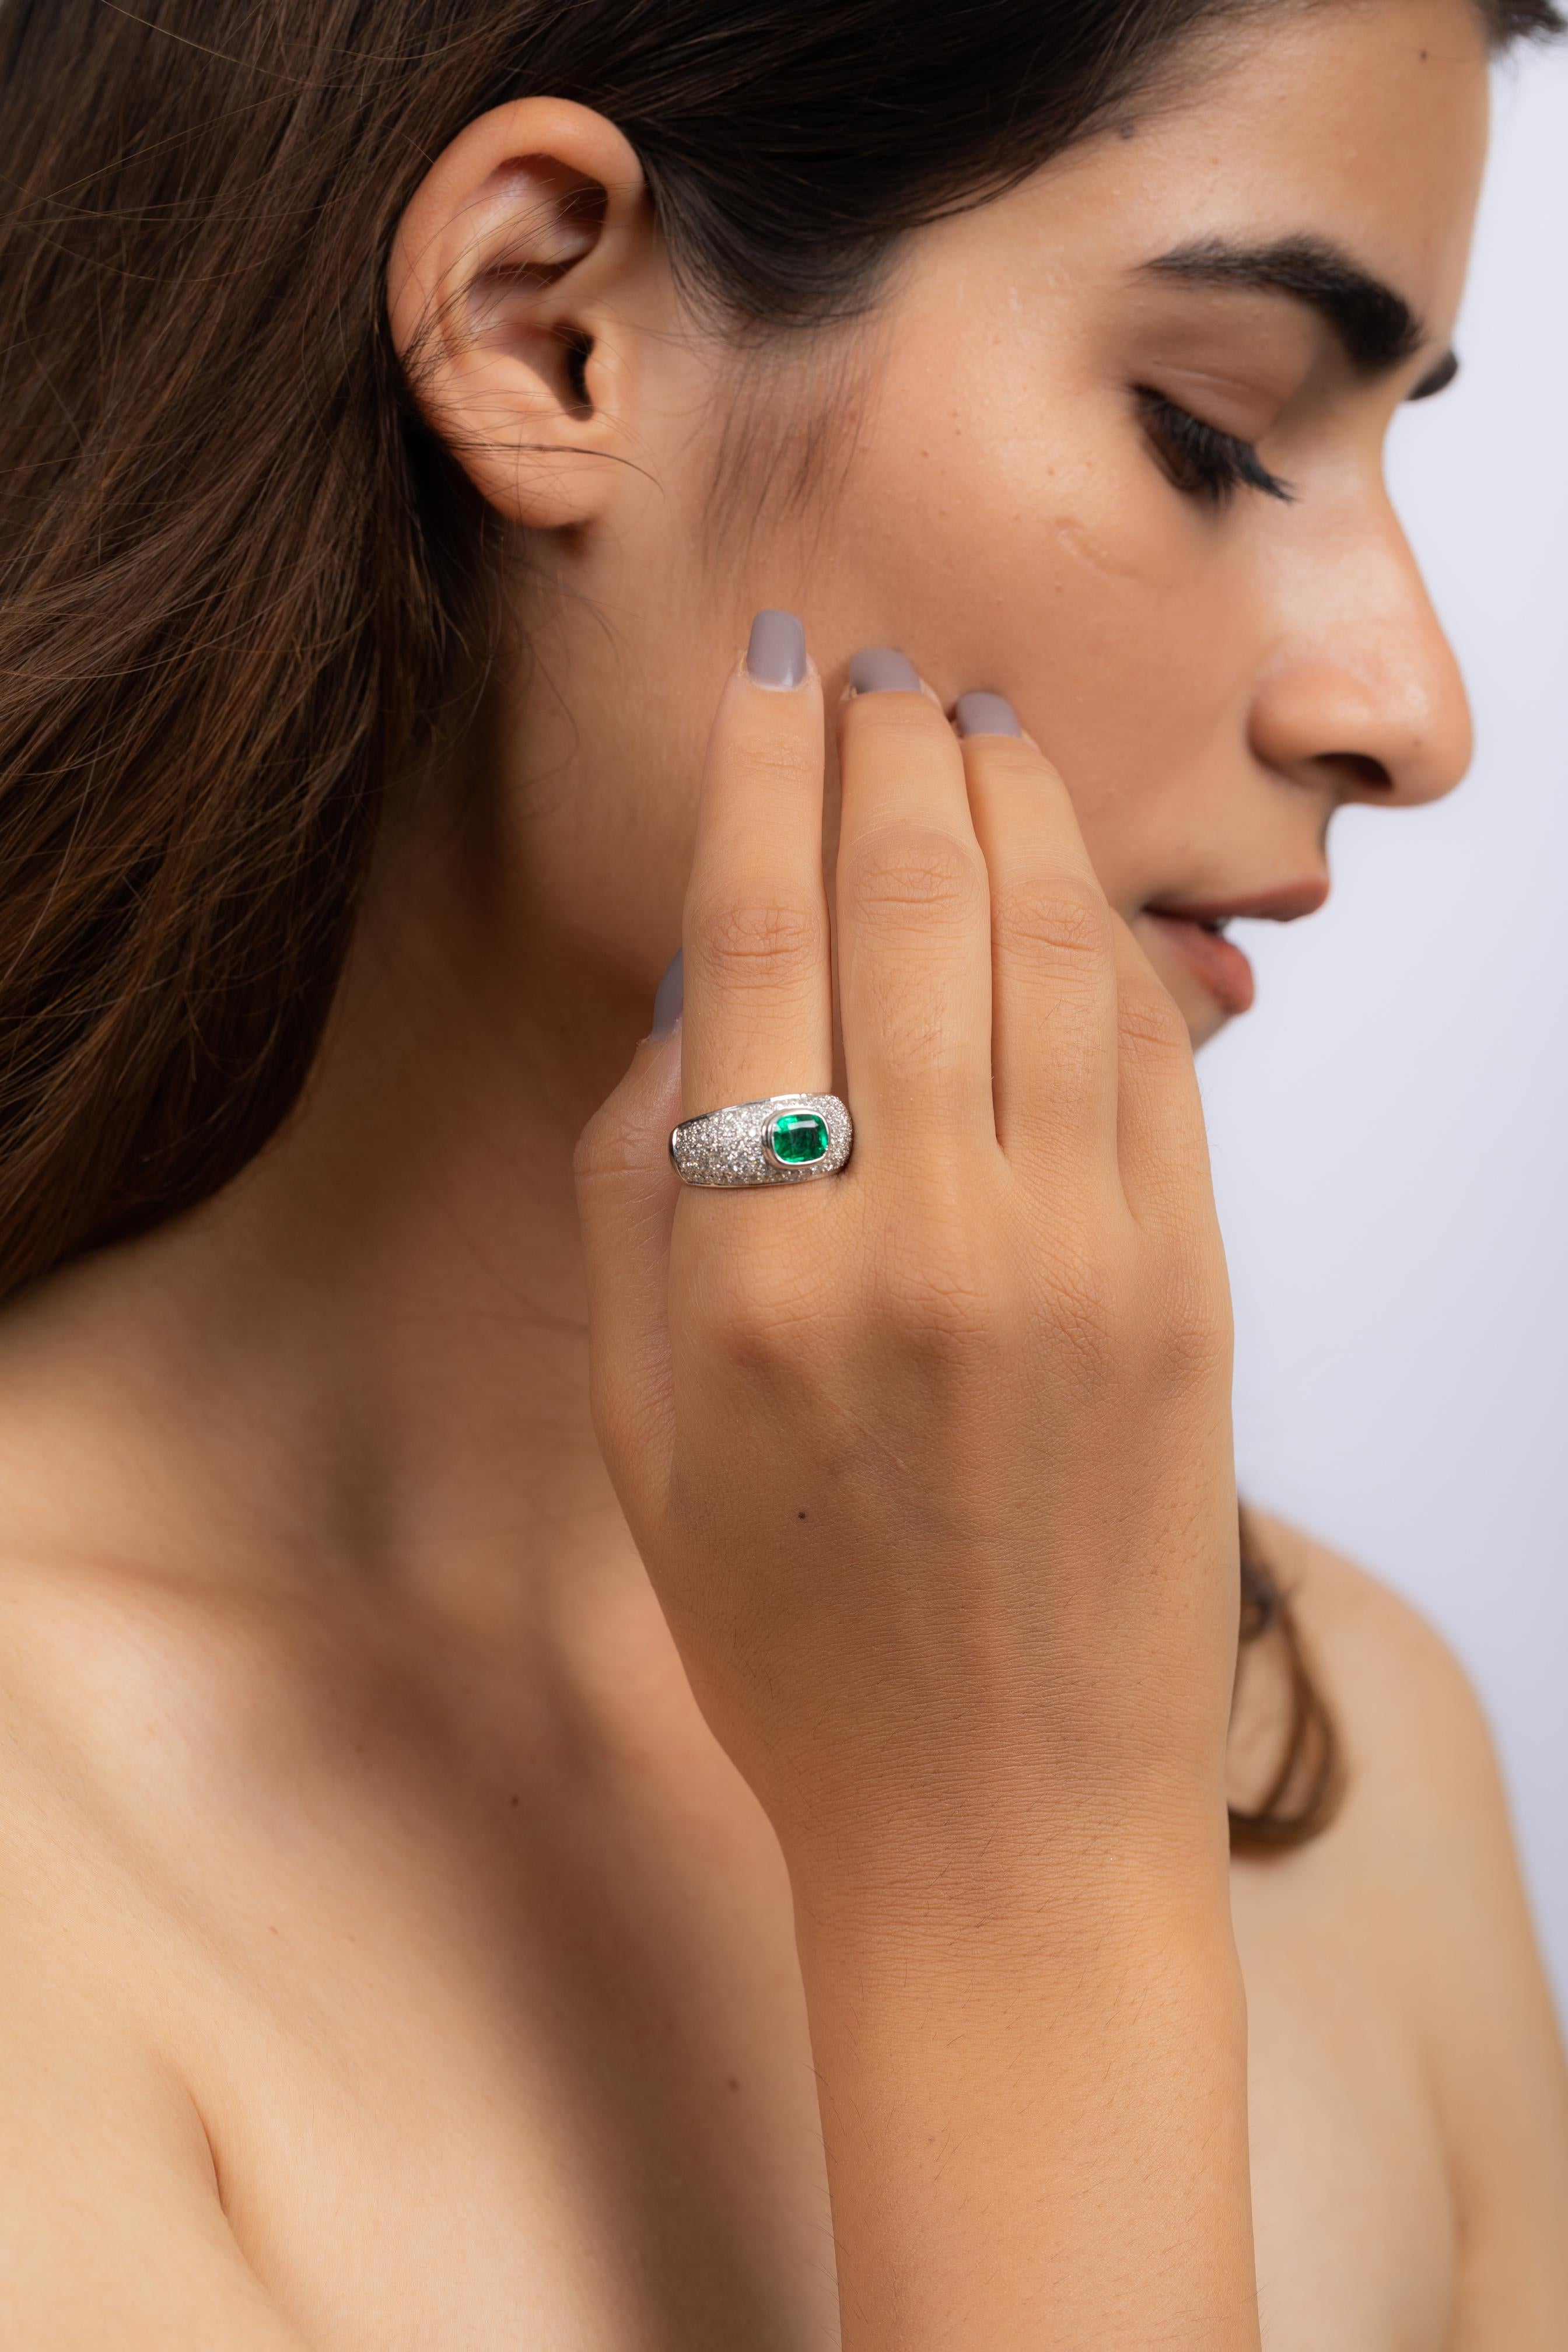 For Sale:  3.08 Carat Oval Shaped Emerald and Diamond Cocktail Ring in 18K White Gold 8